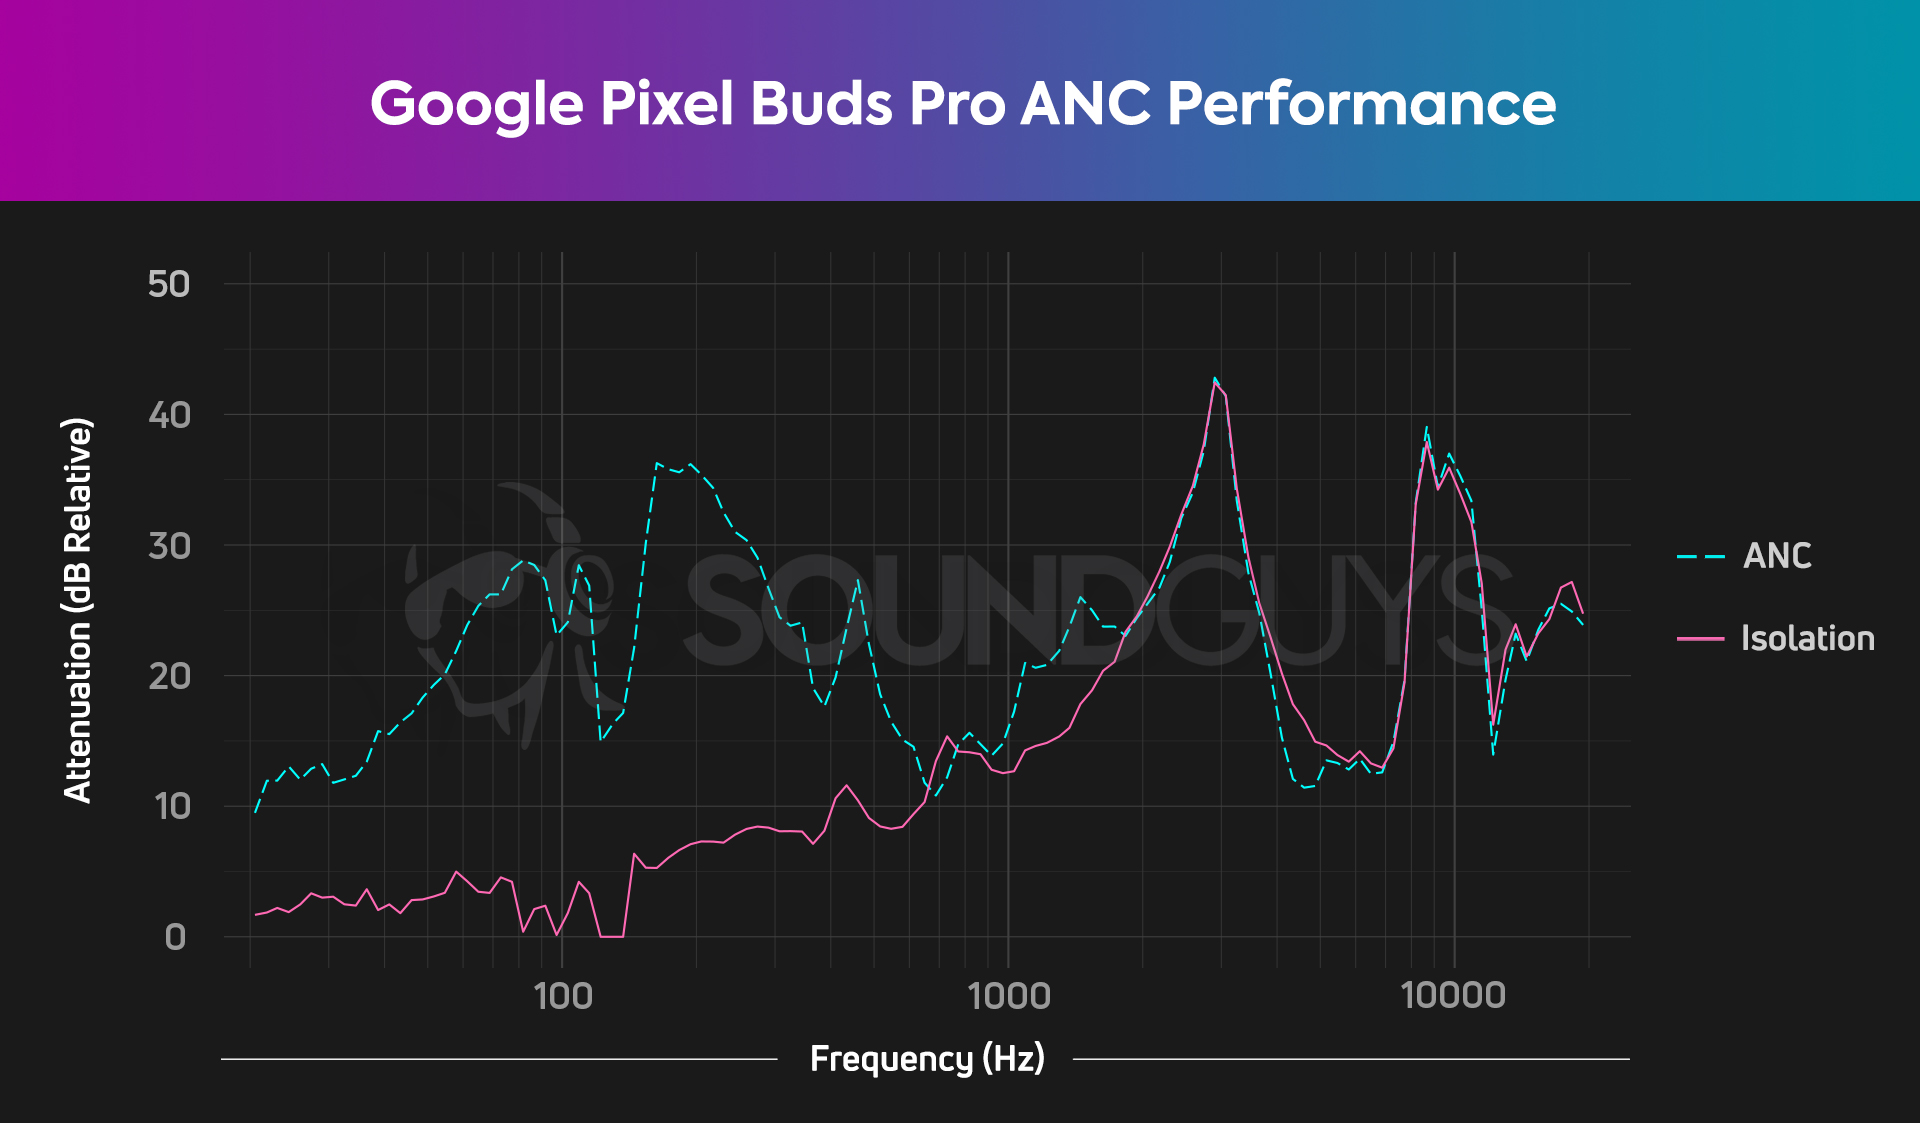 A noise canceling and isolation chart for the Google Pixel Buds Pro, which shows very good low end attenuation for a pair of true wireless earbuds.